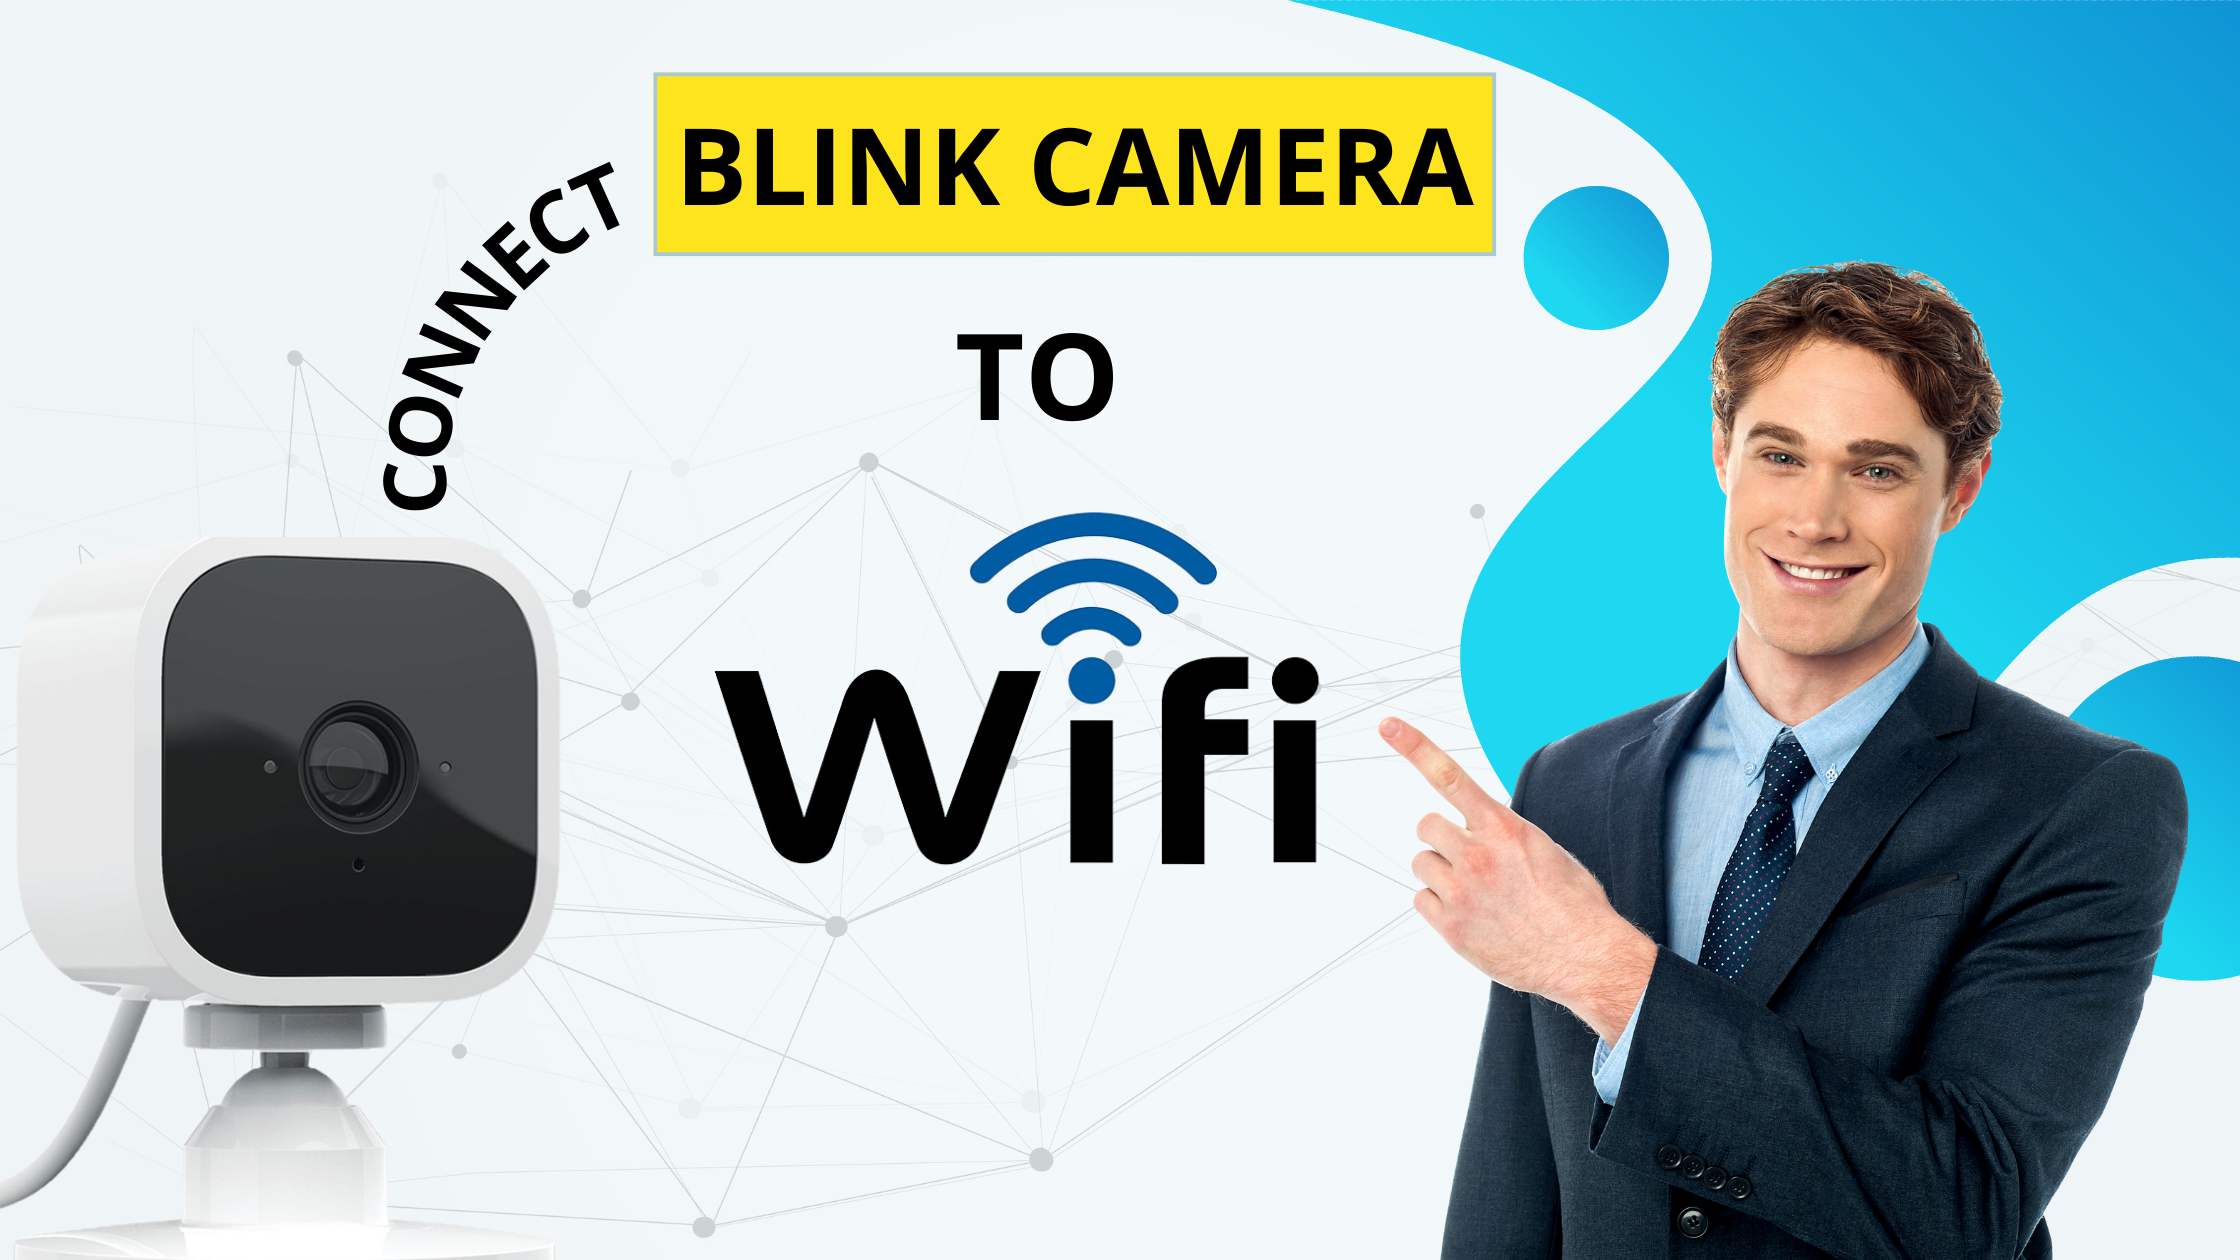 How To Connect Blink Camera To Wifi?